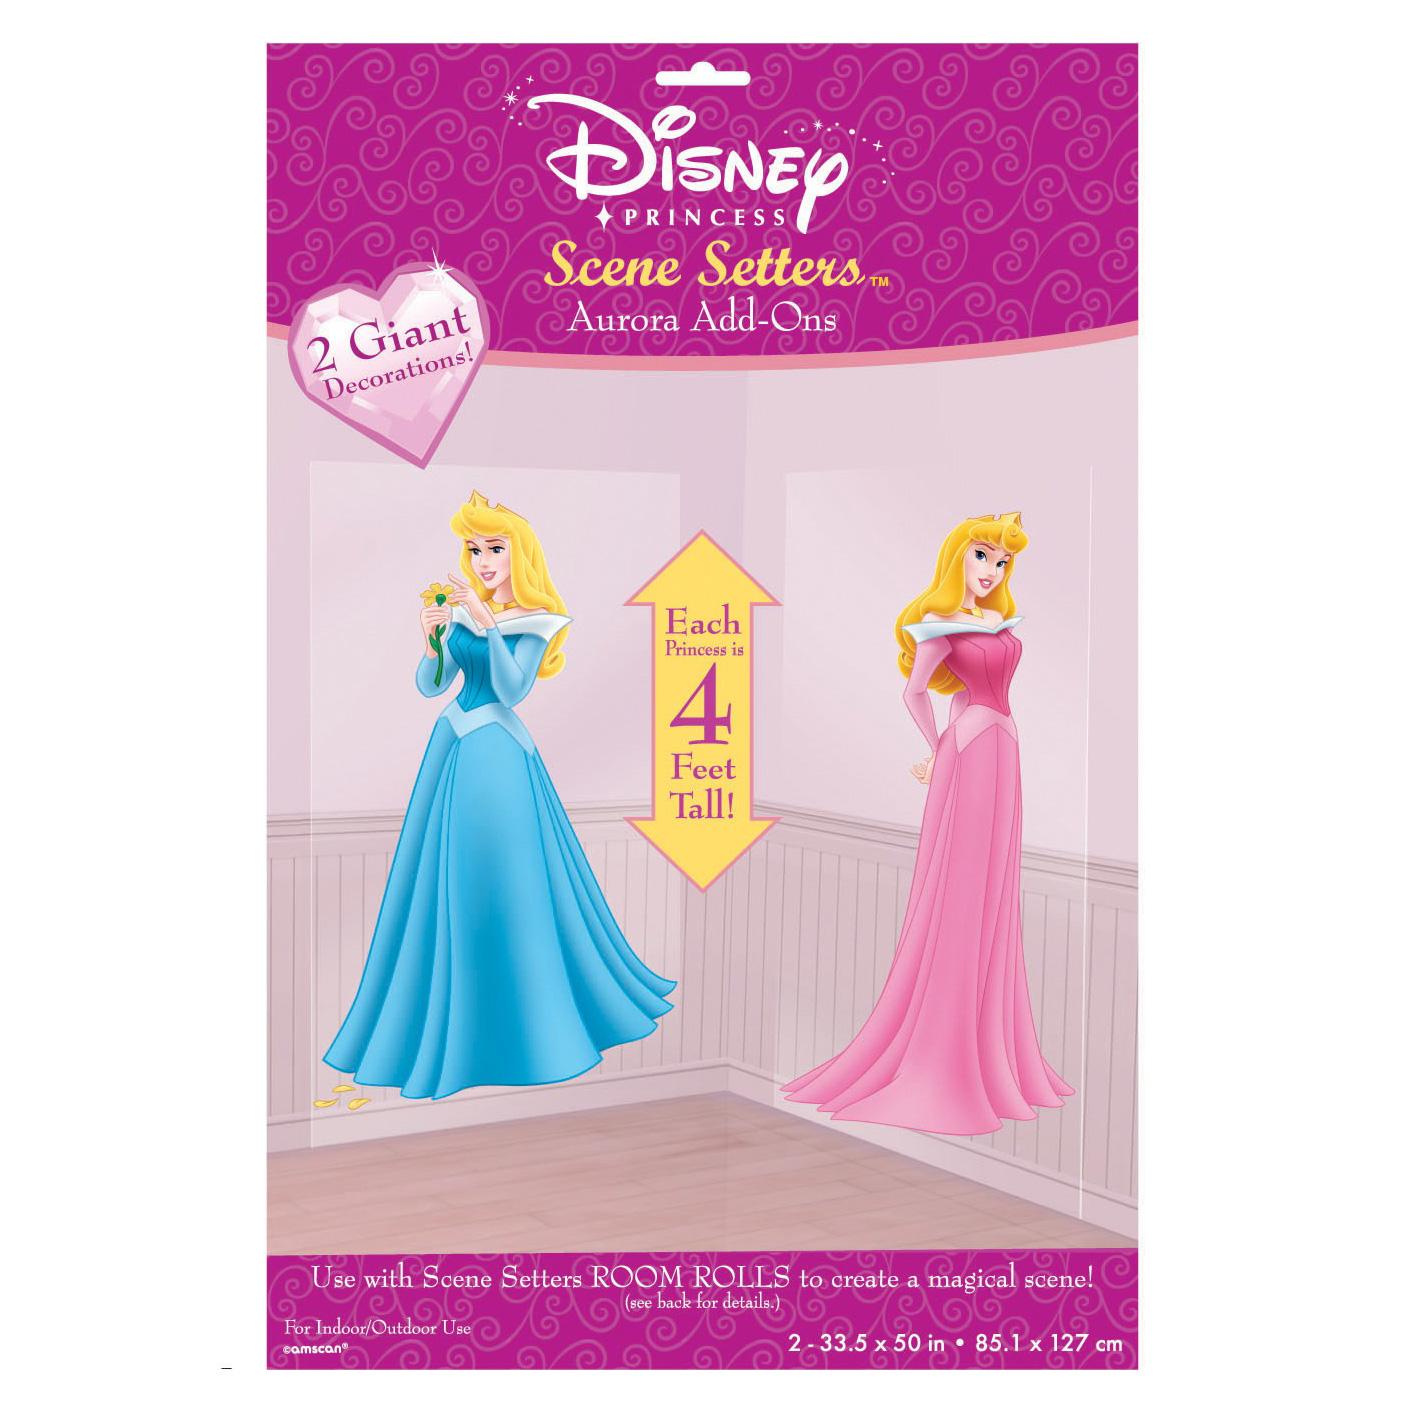 Sleeping Beauty Scene Setter Add-Ons 2pcs Decorations - Party Centre